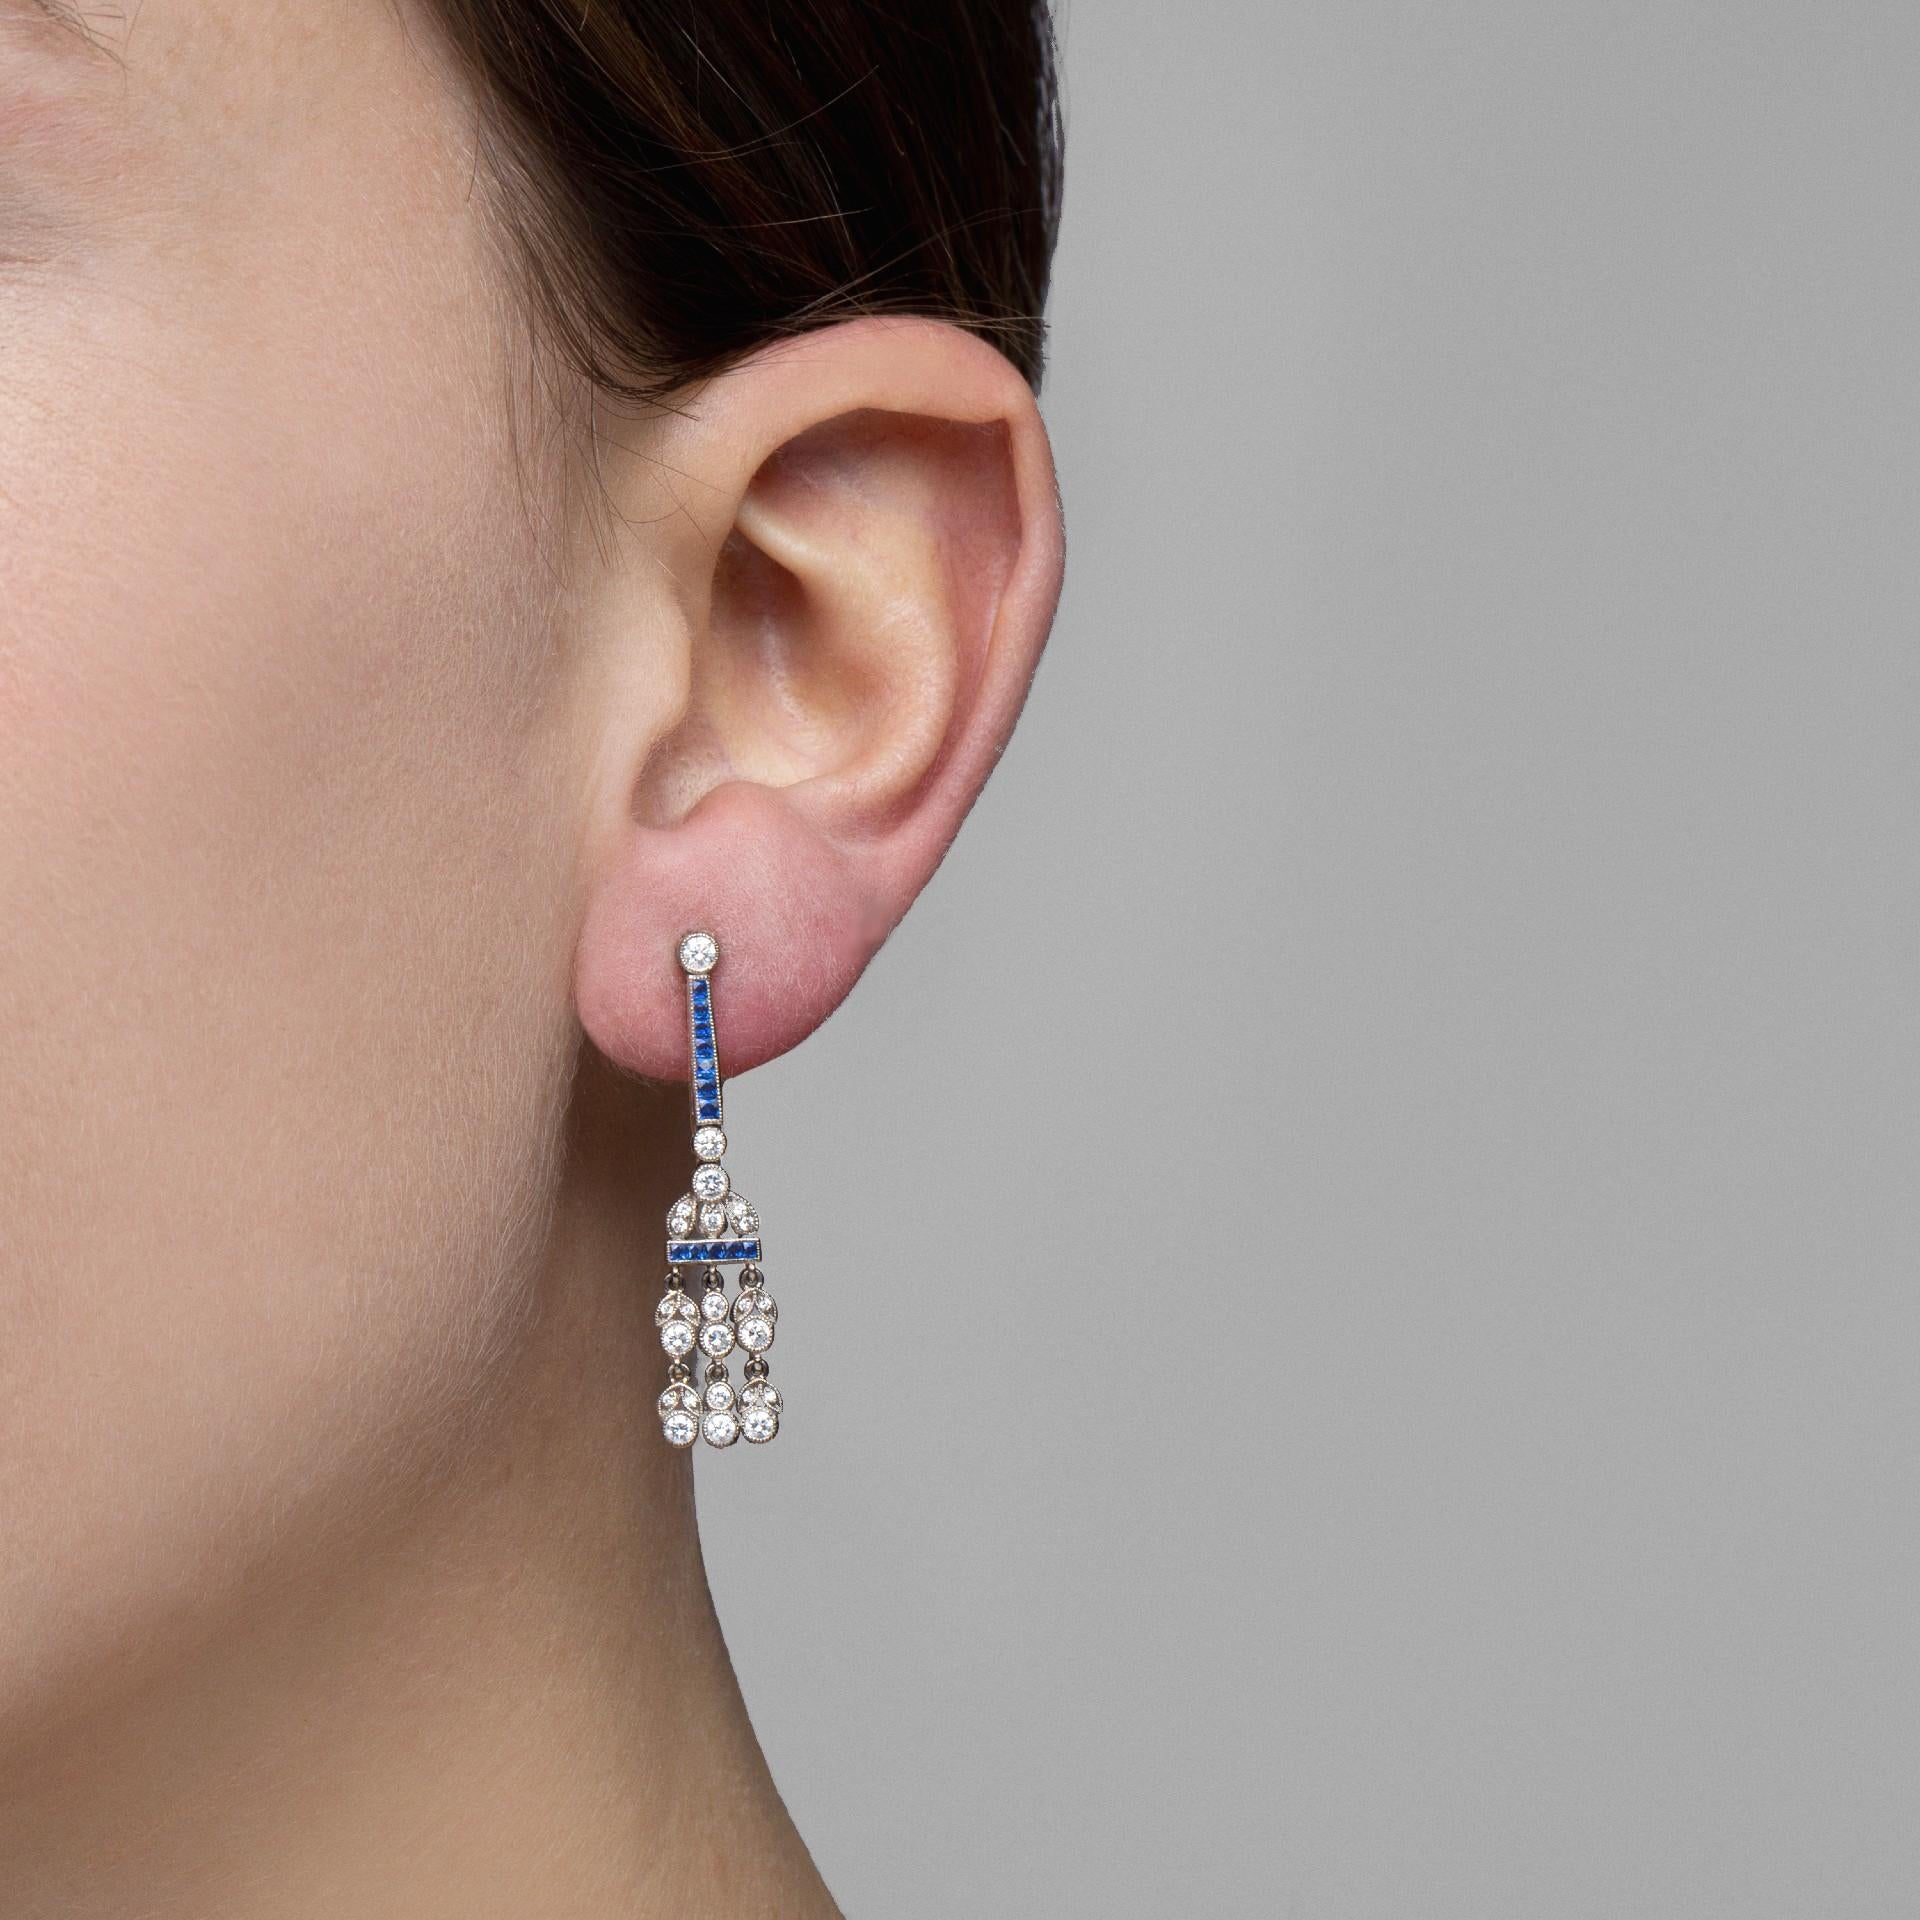 Alex Jona design collection, hand crafted in Italy, platinum dangling chandelier earrings, set with 1.02 carats of brilliant cut diamonds G Color, VVS Clarity and 0.93 carats of square cut blue sapphires. 
Dimensions: H x 38mm, W x 9mm, D x 2mm / H